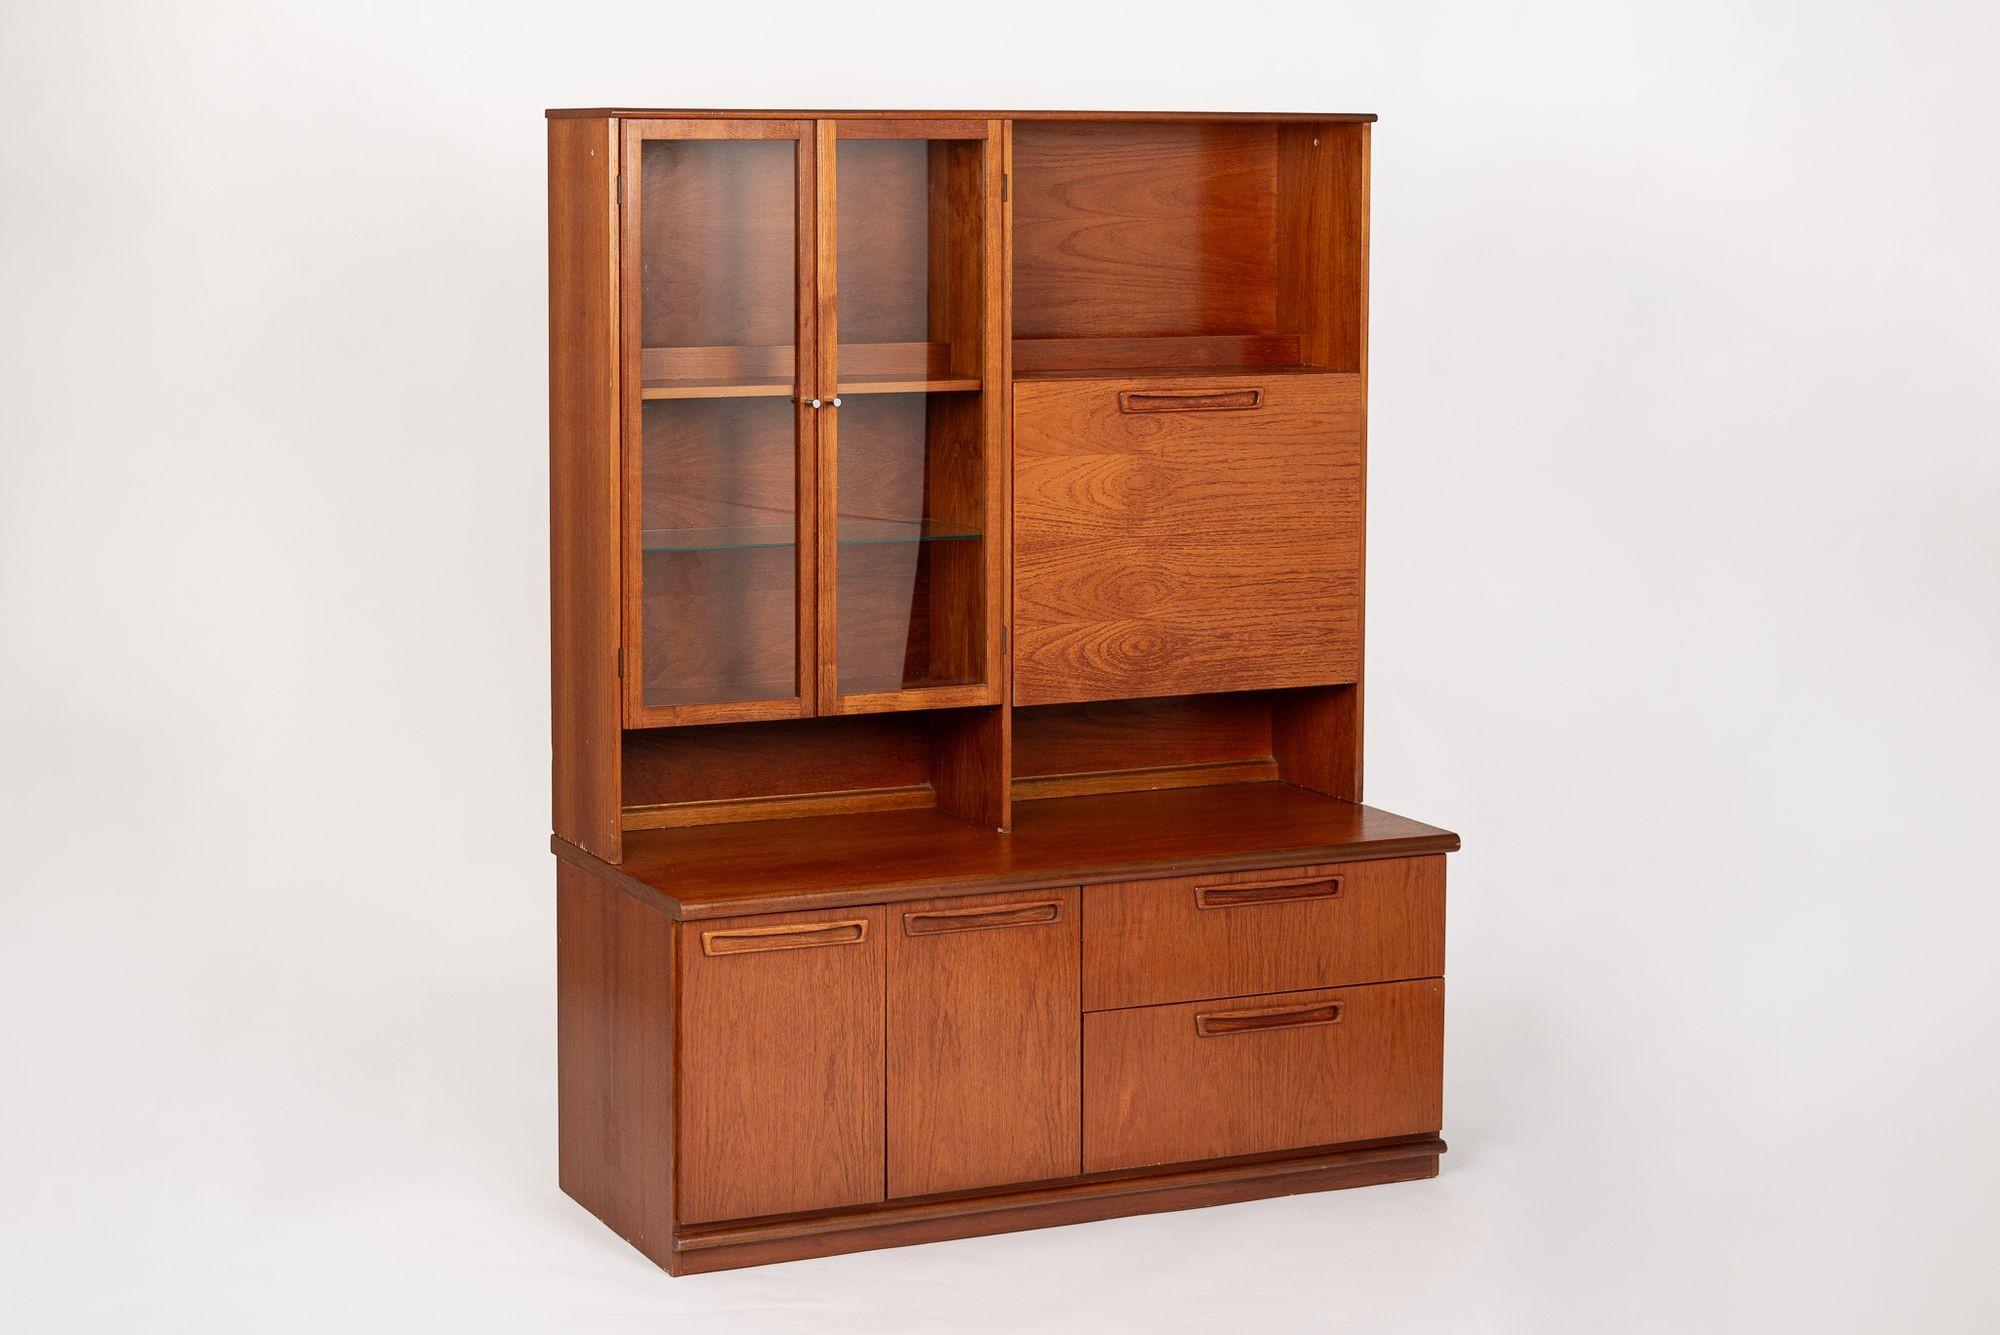 This vintage mid century modern step-back teak secretary bookcase or wall unit cabinet was made in Denmark in 1981. This beautiful cabinet is elegantly proportioned with clean, minimalist lines and is well-crafted from teak wood with a rich, warm